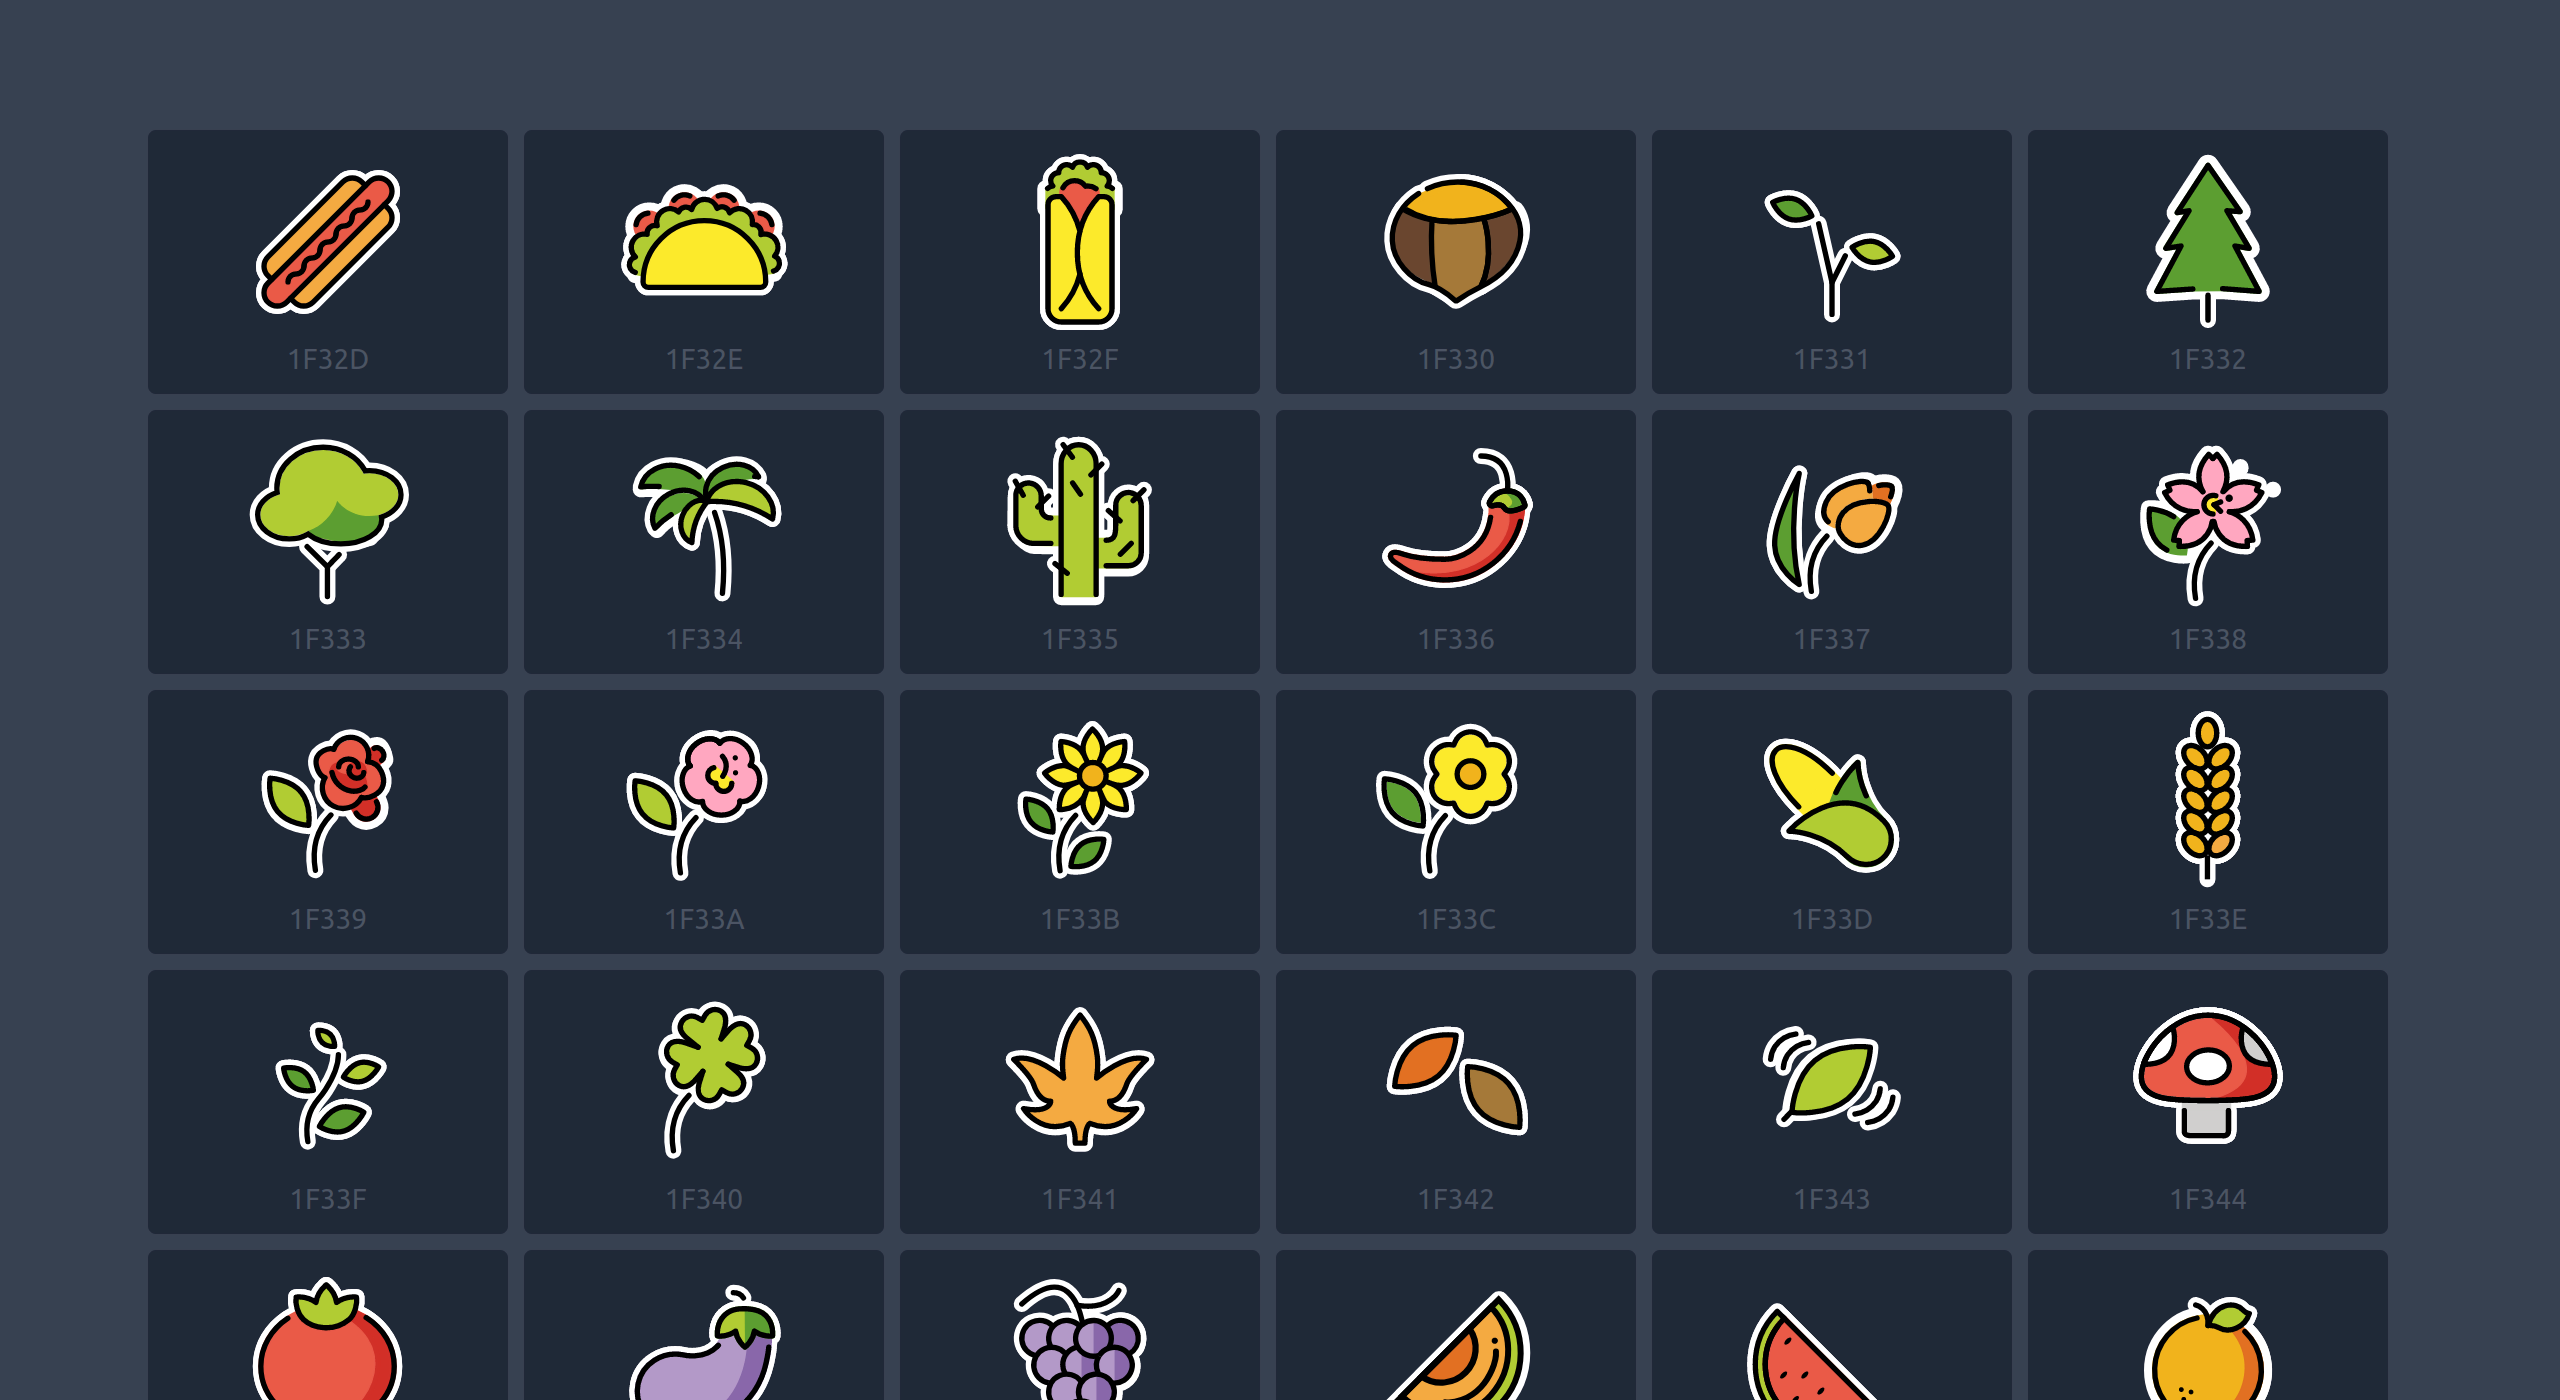 The screenshot of the website showing the emoji